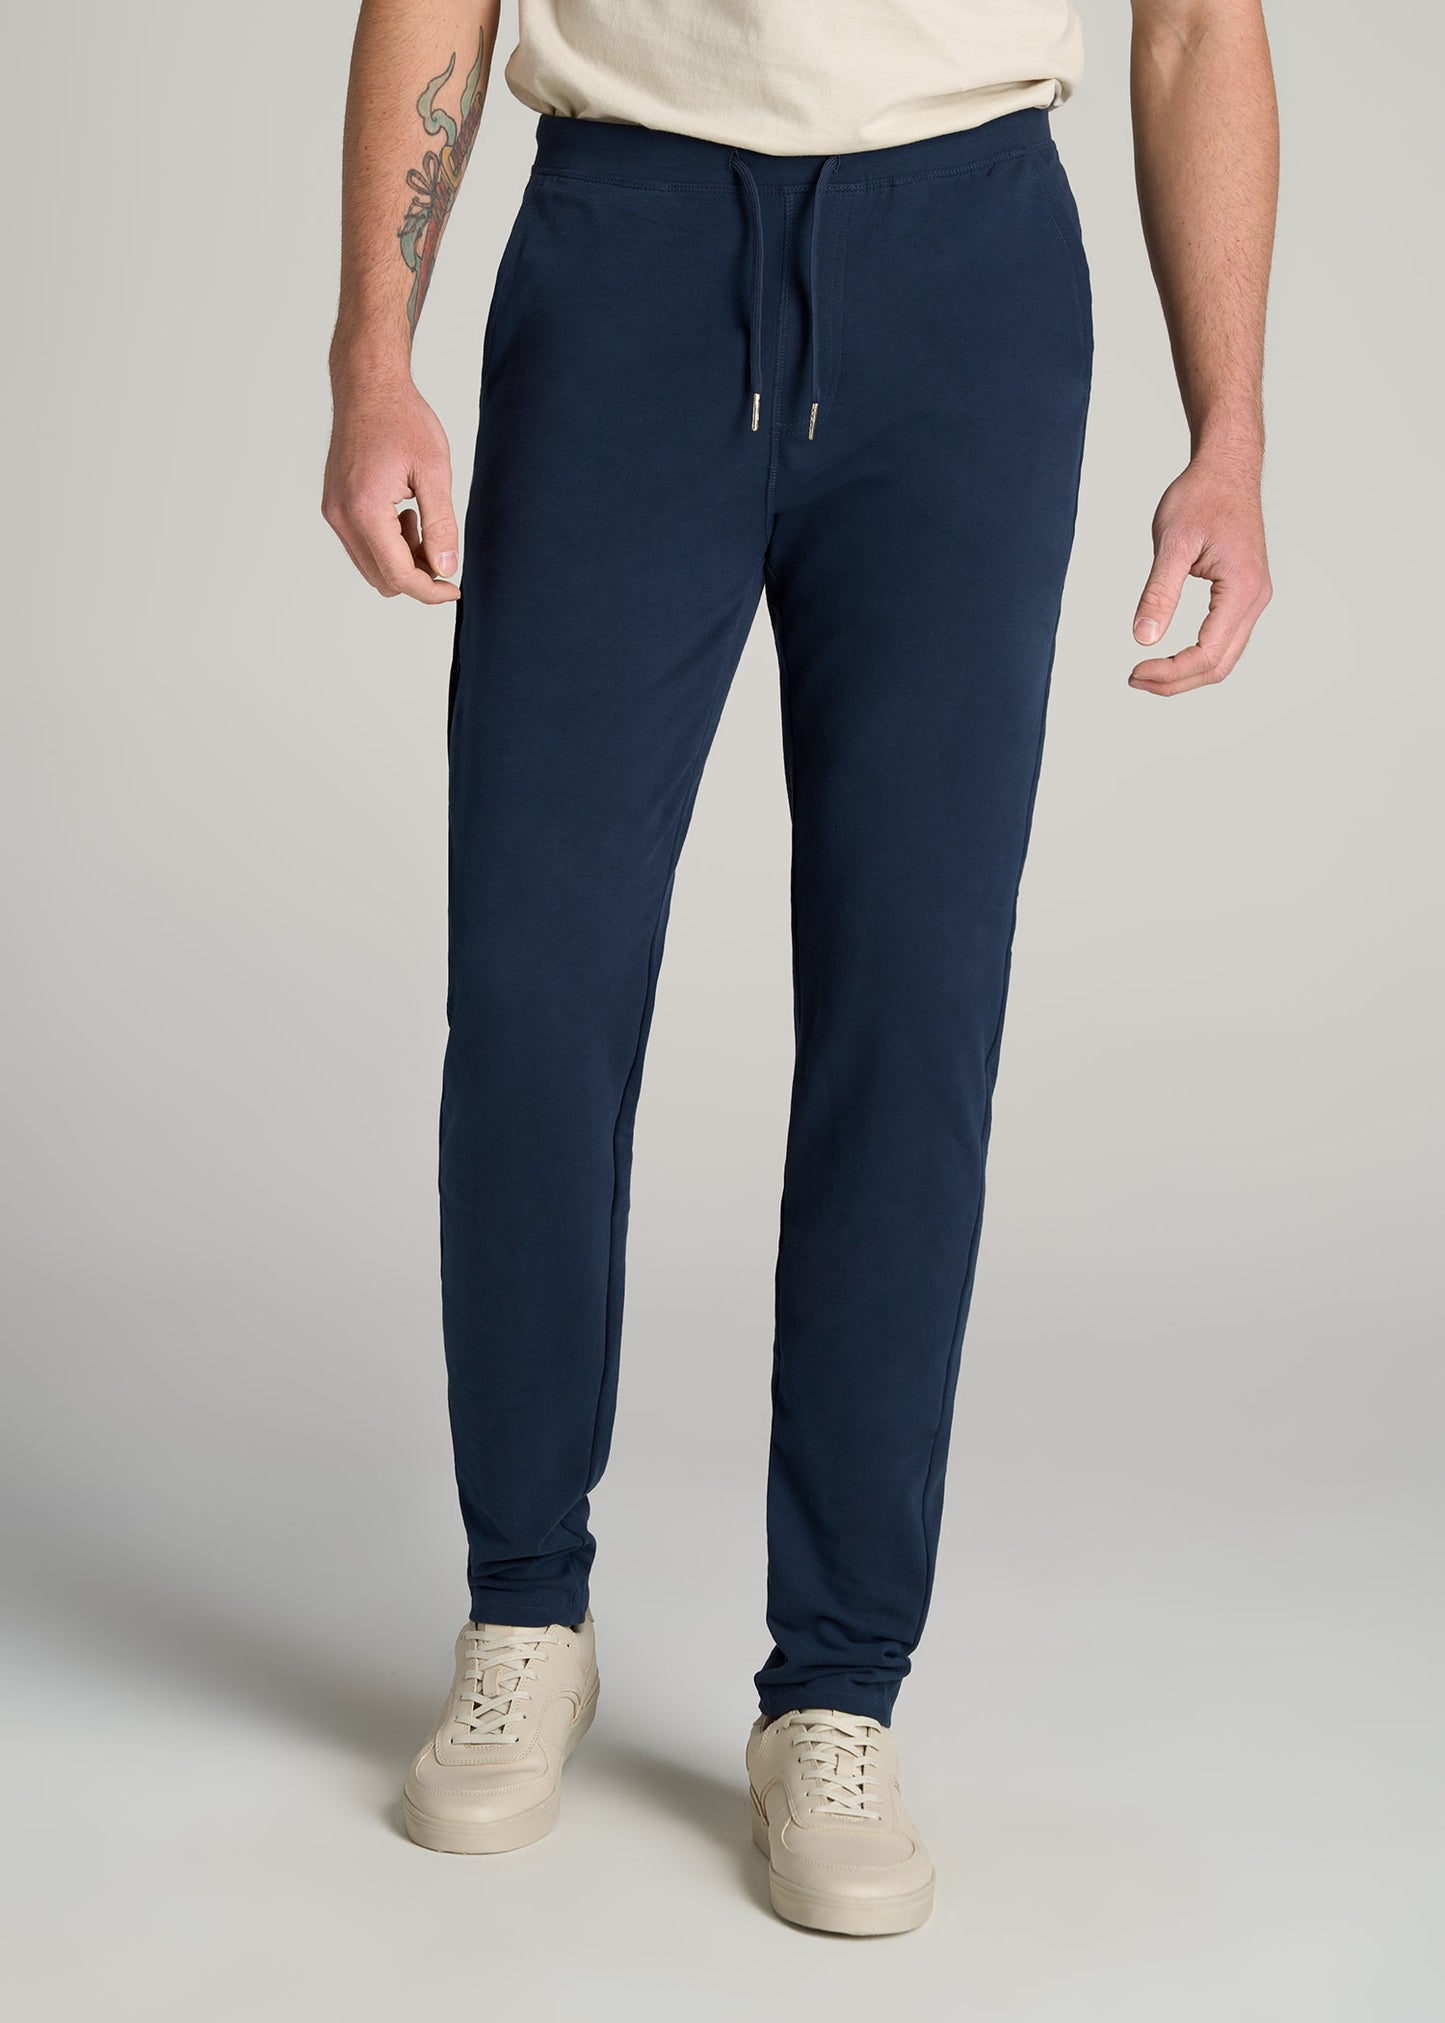    American-Tall-Men-Microsanded-French-Terry-Sweatpant-Marine-Navy-front